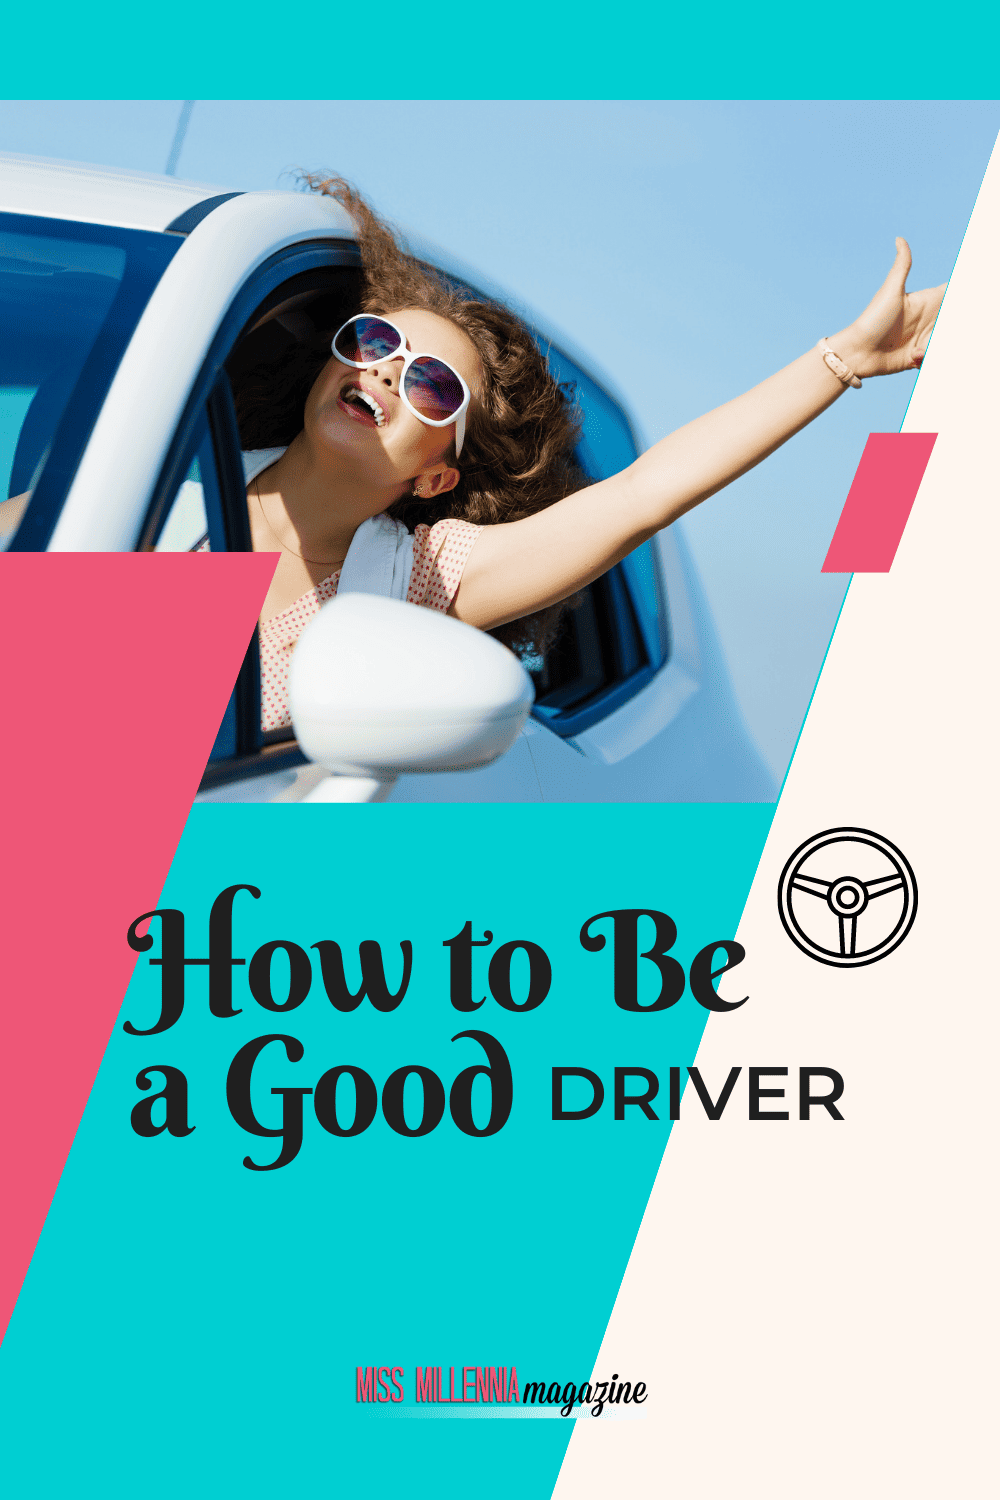 How to Be a Good Driver